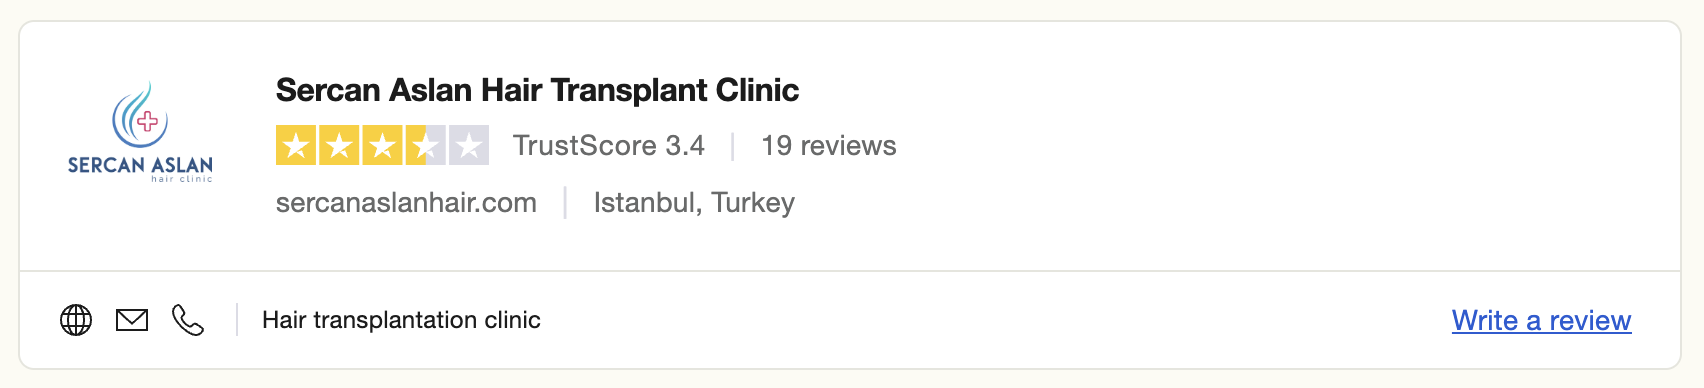 Trustscore review of a particular hair transplant clinic